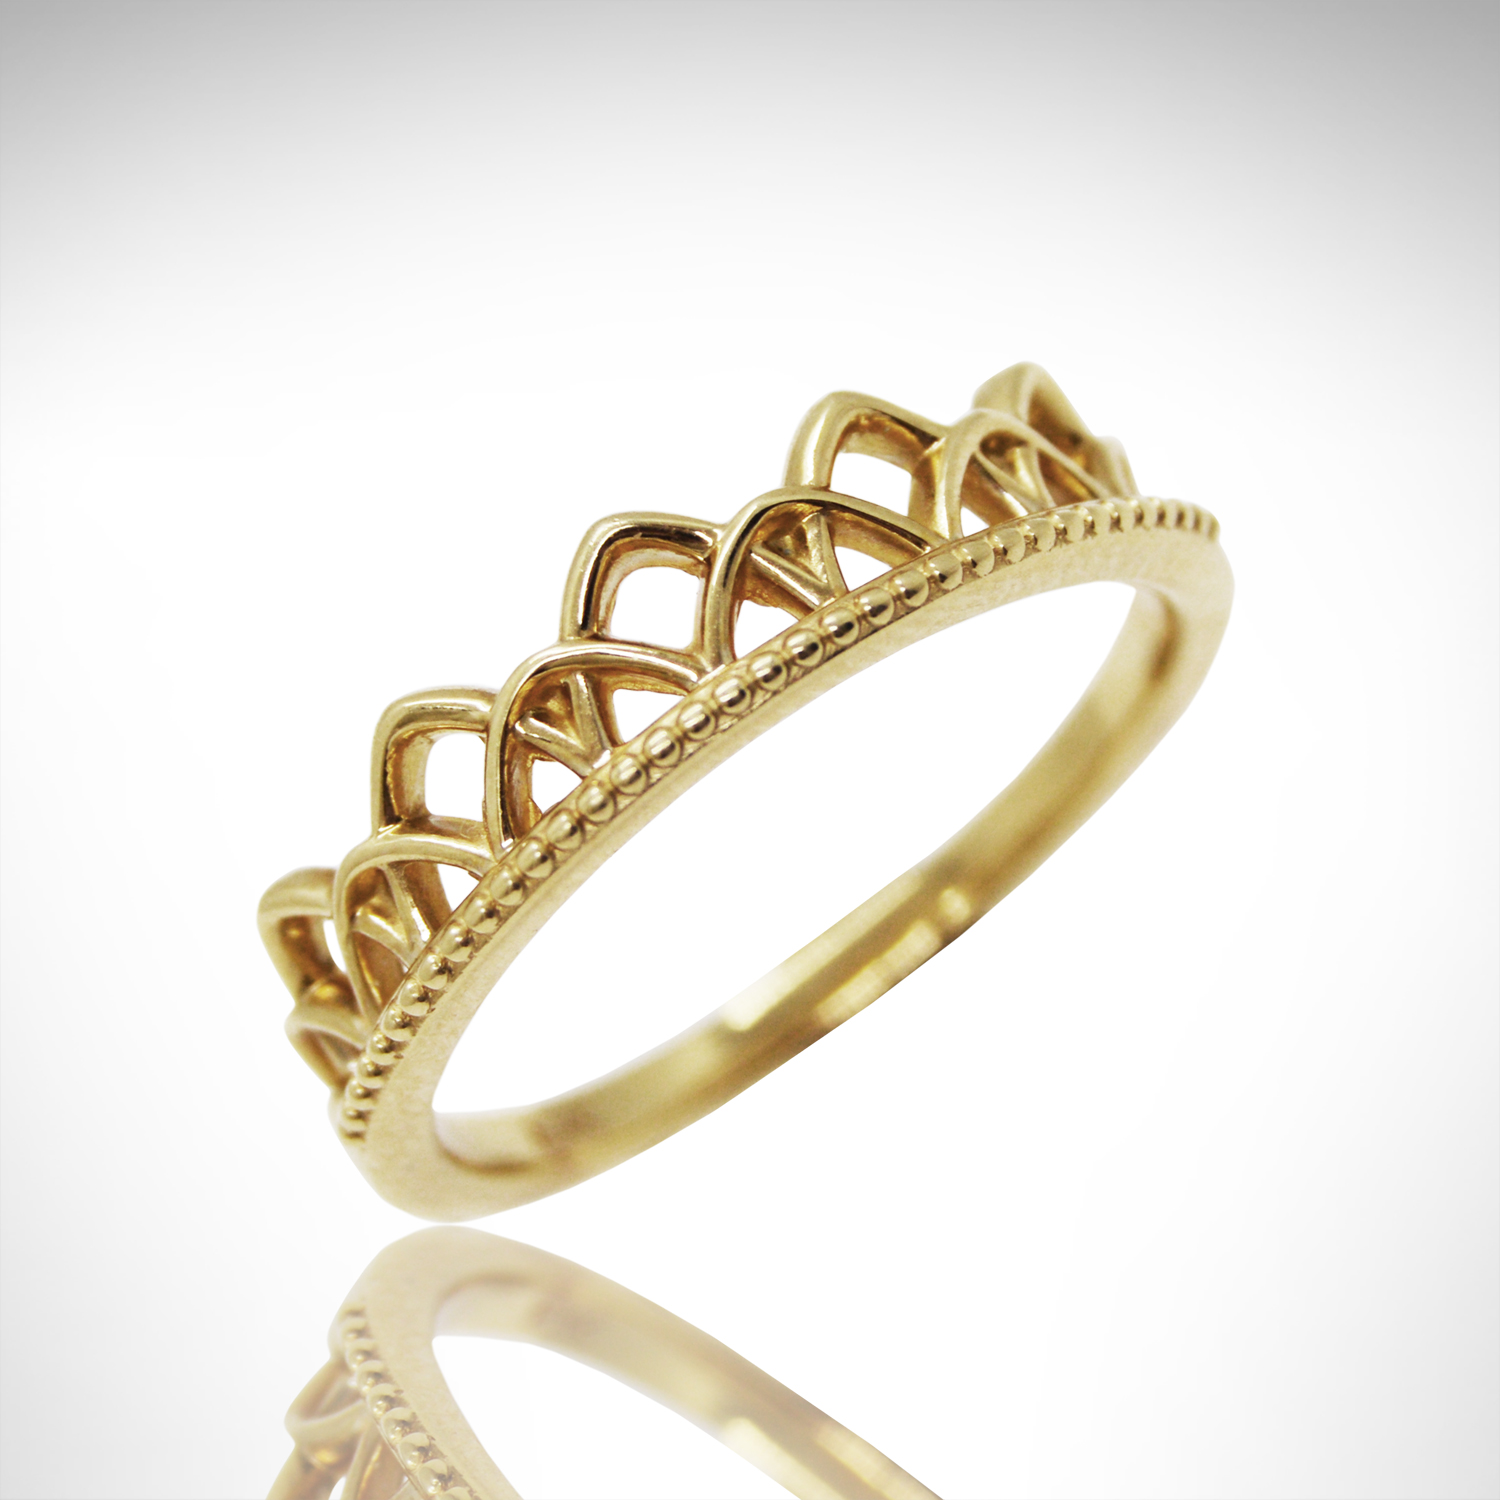 14k yellow gold stackable ring in openwork design like lace or crown, art deco